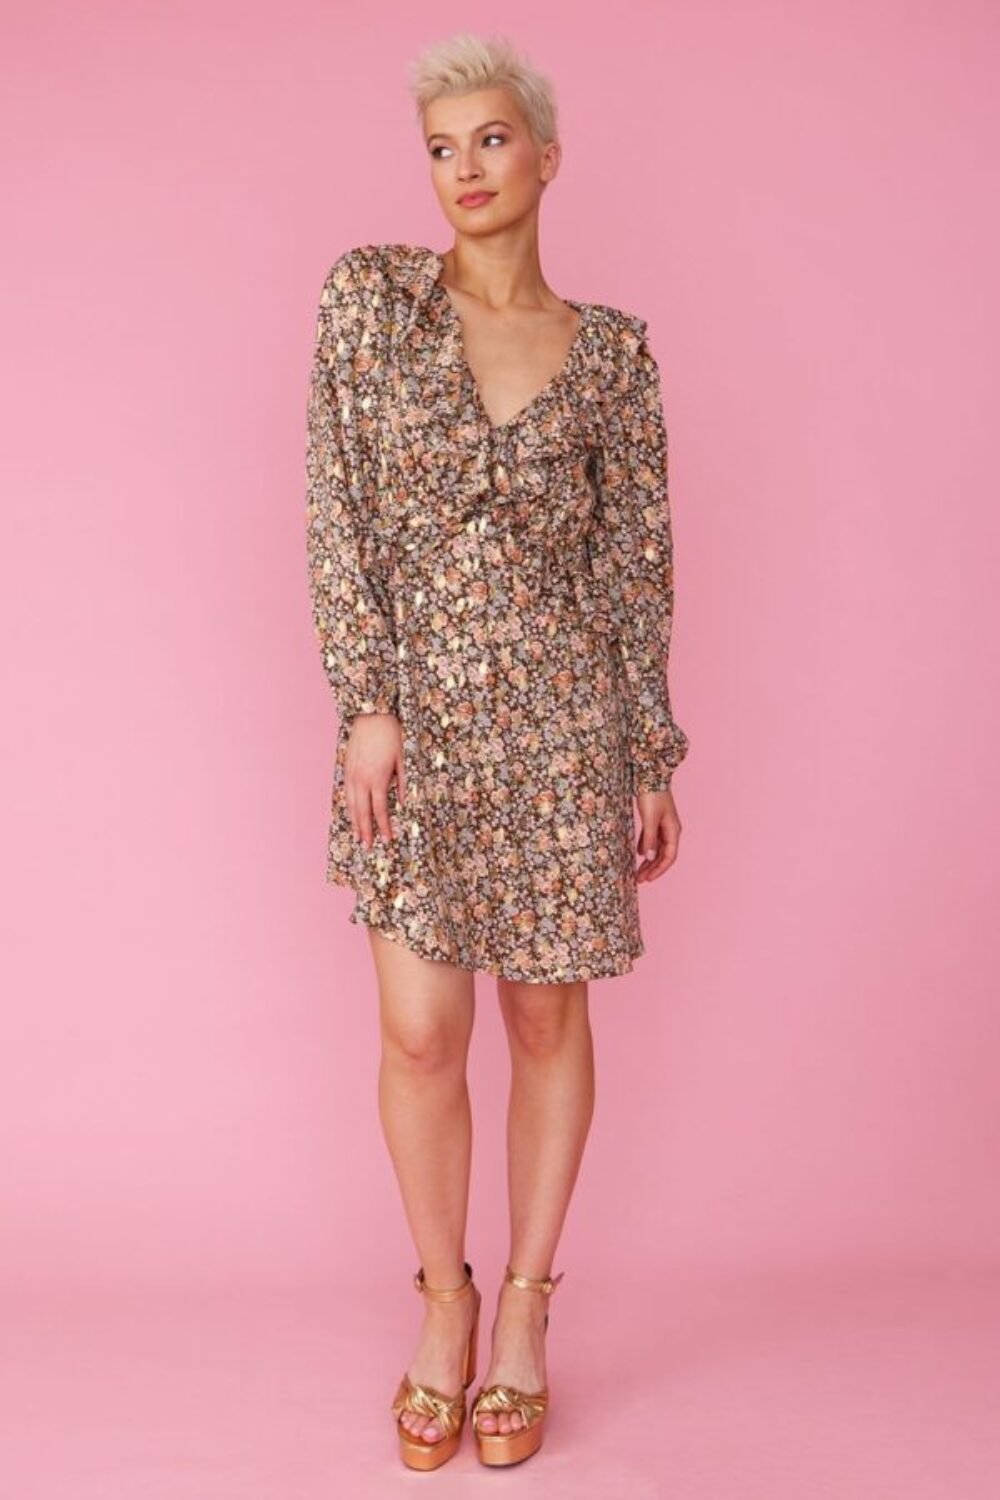 Shop Lux Silk Blend Floral Knee Length Dress and women's luxury and designer clothes at www.lux-apparel.co.uk